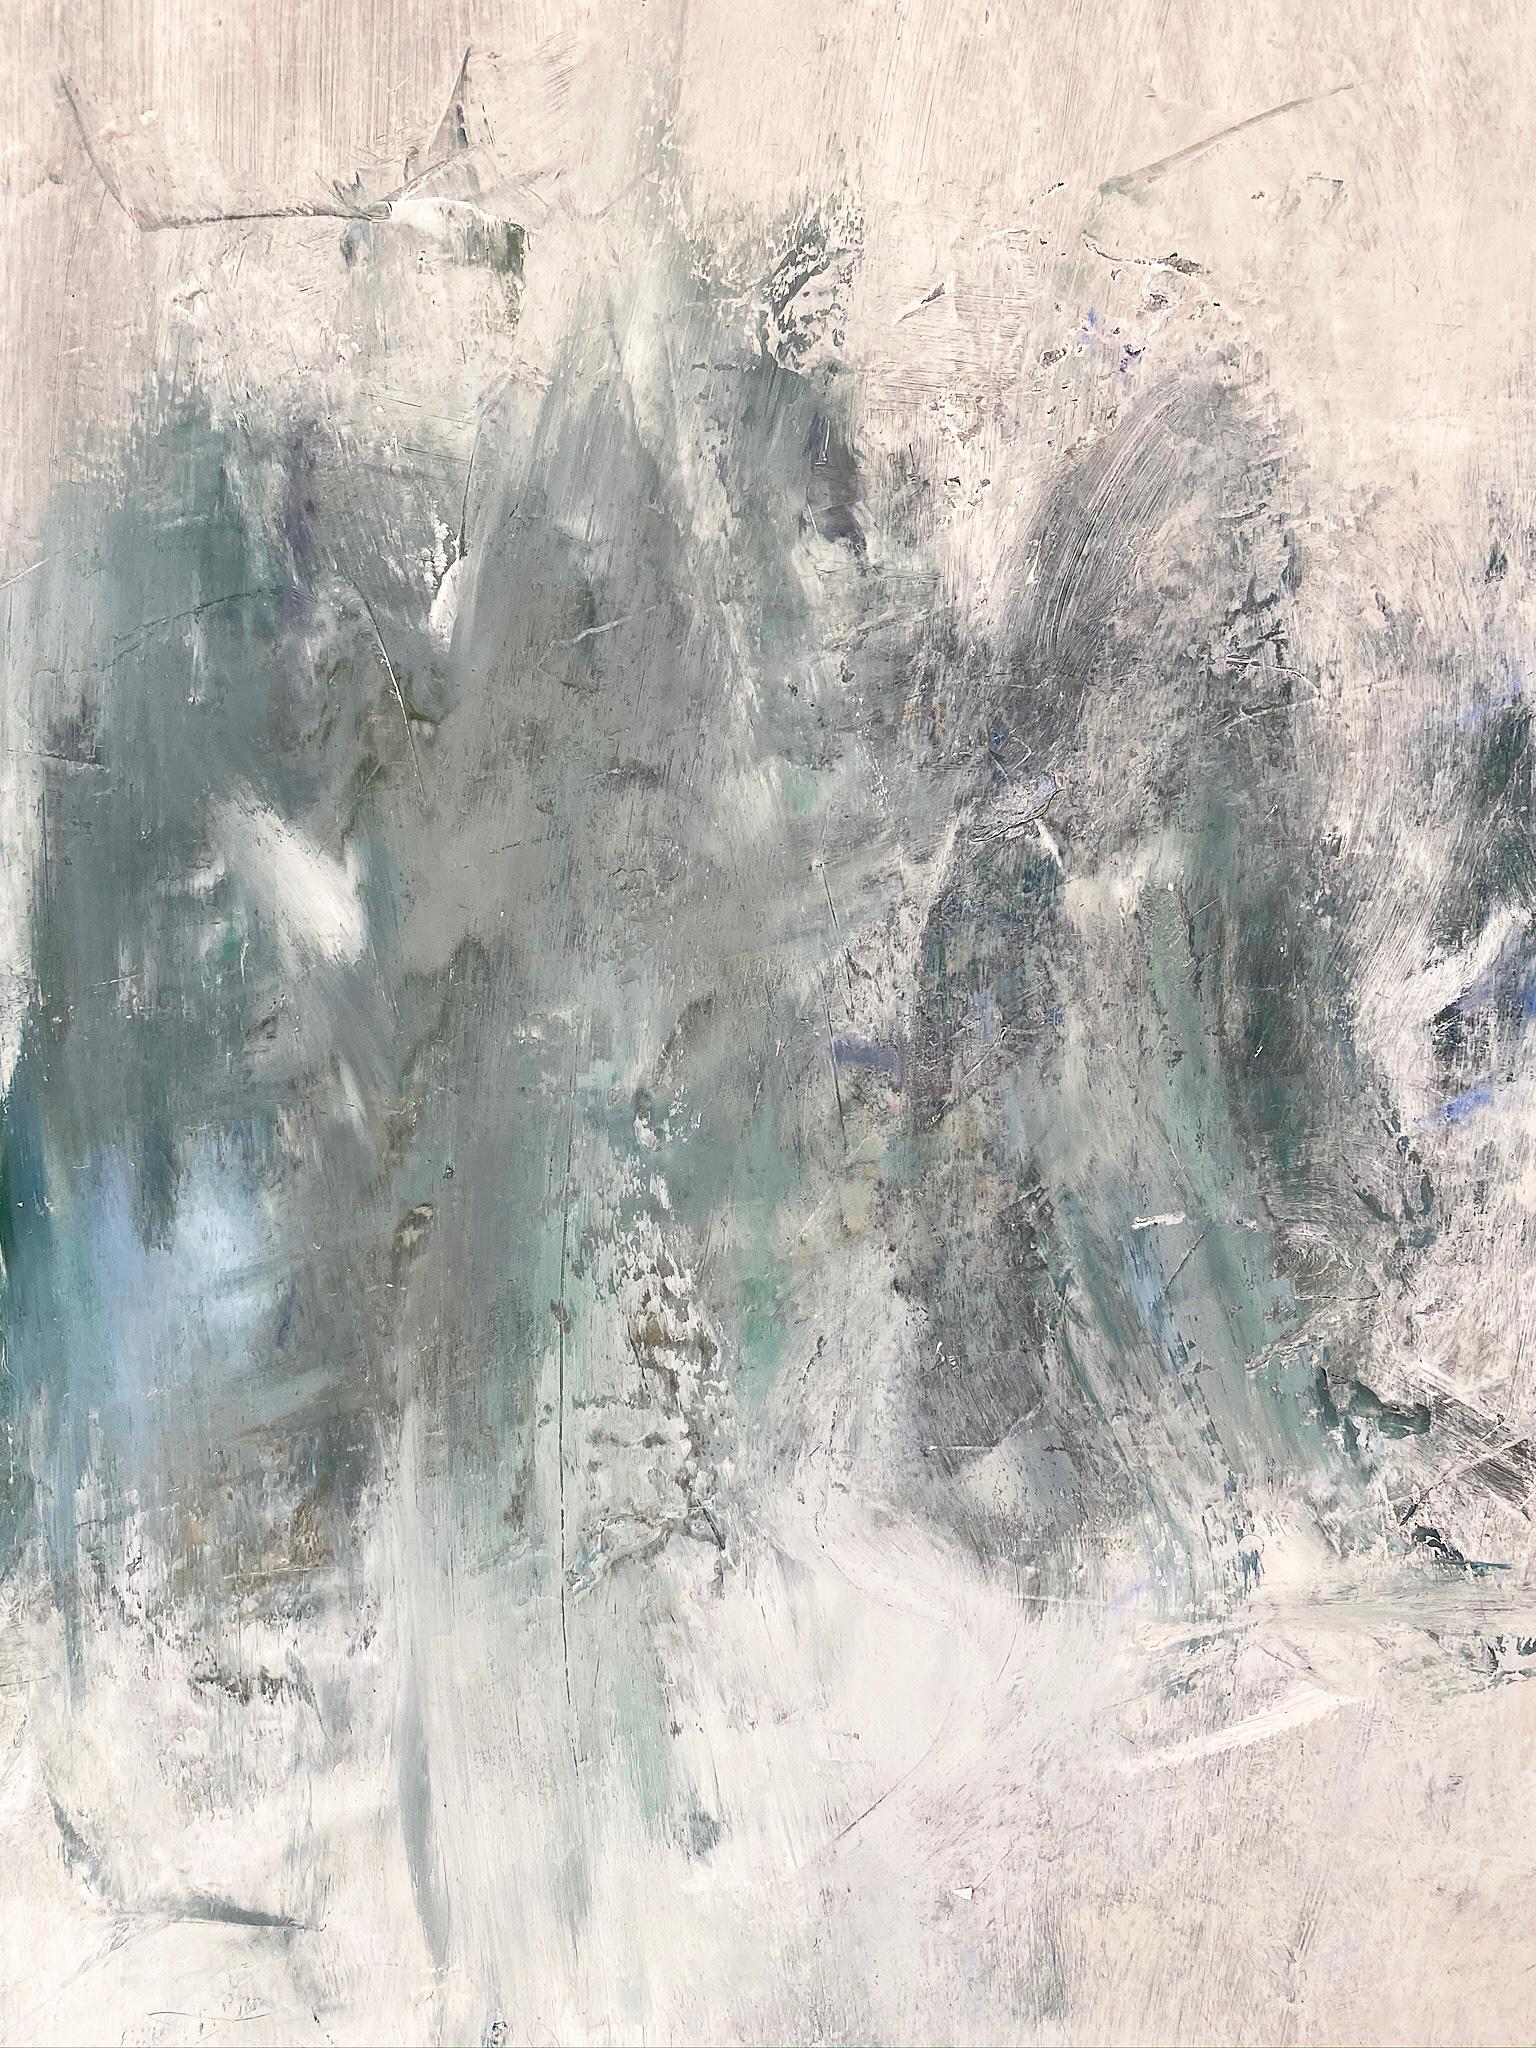 Oil & cold wax painting, Sandrine Kern, Winter White Out For Sale 2